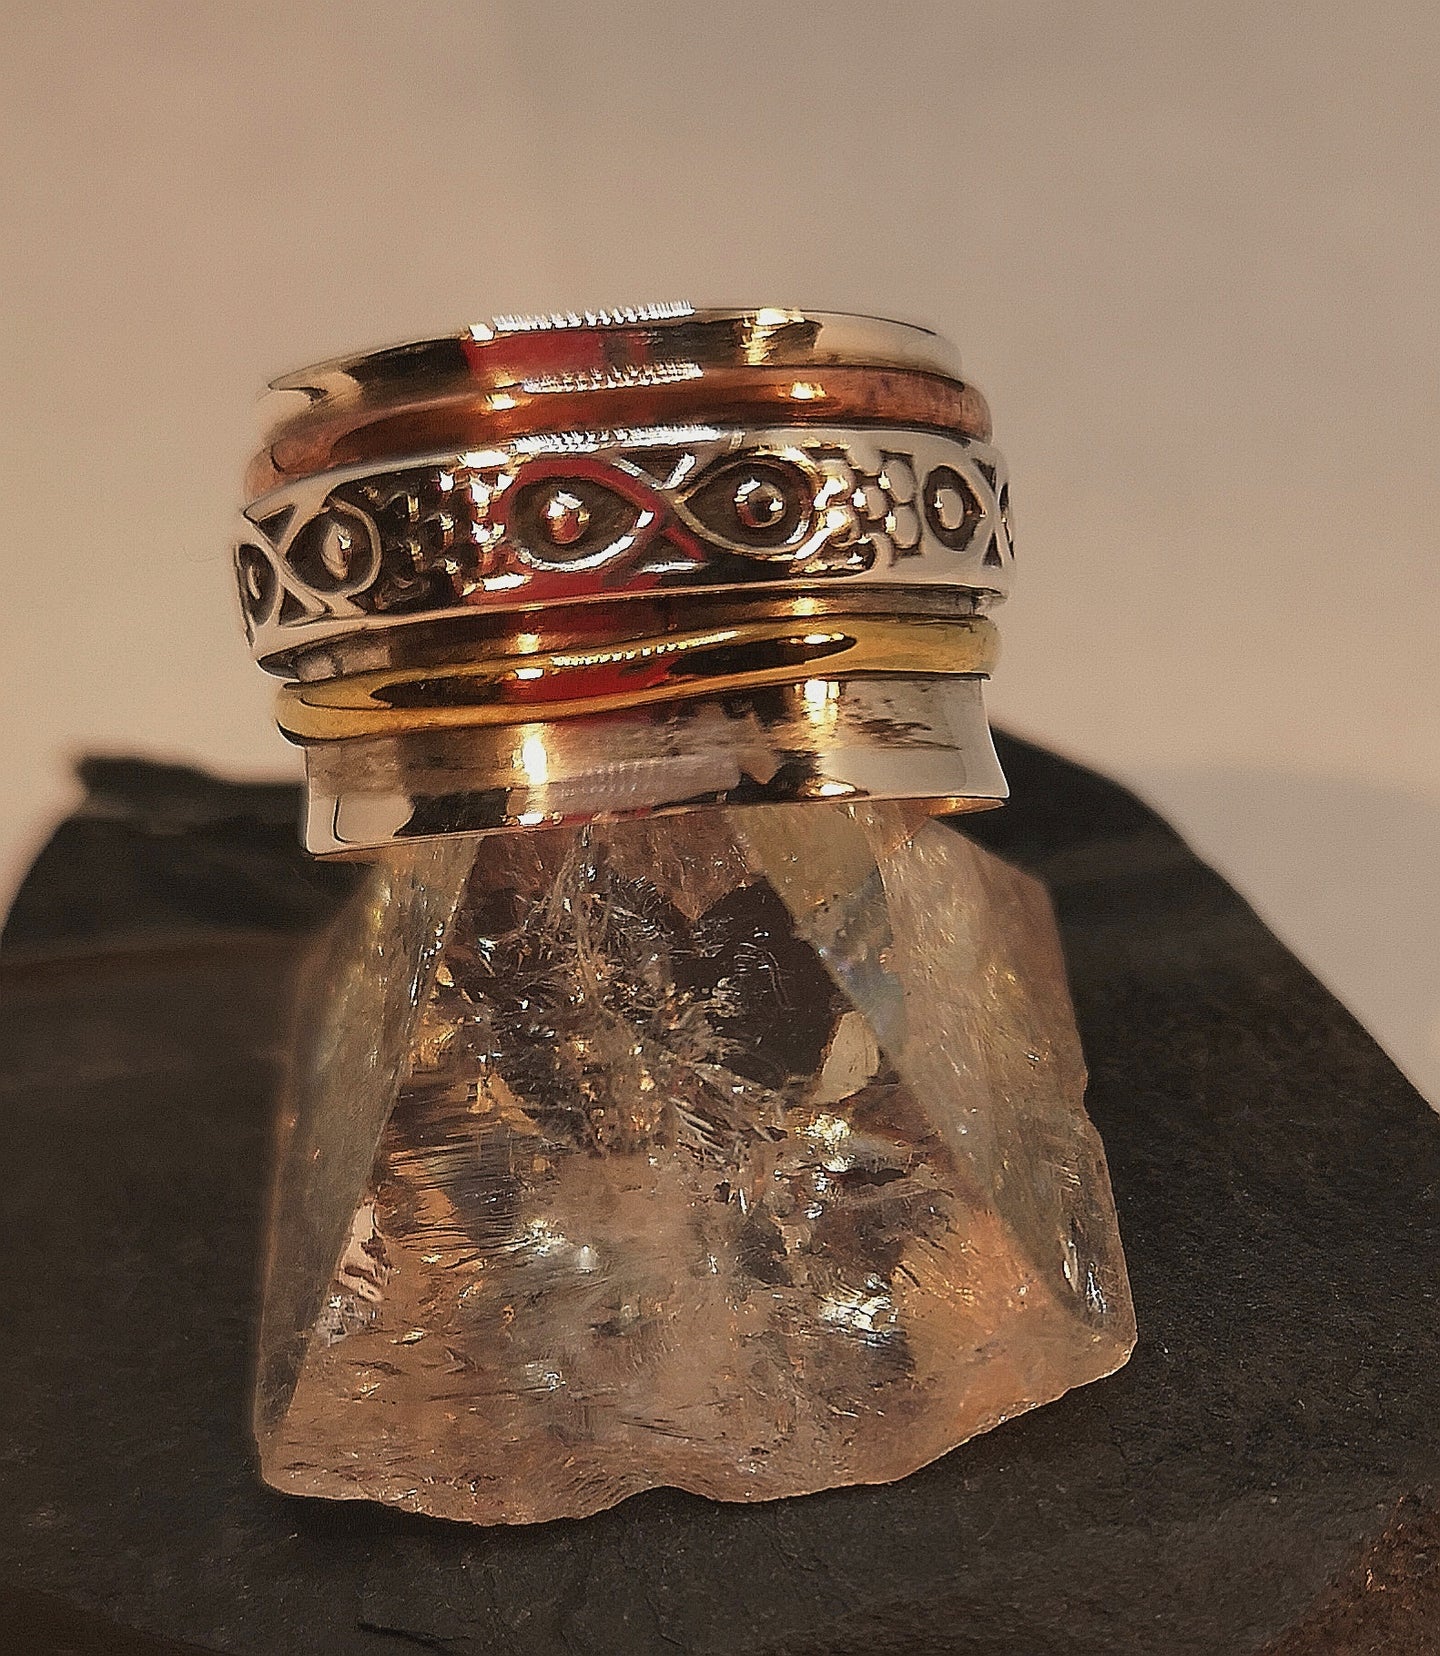 Meditation/Spin ring in sterling silver with copper and brass accents